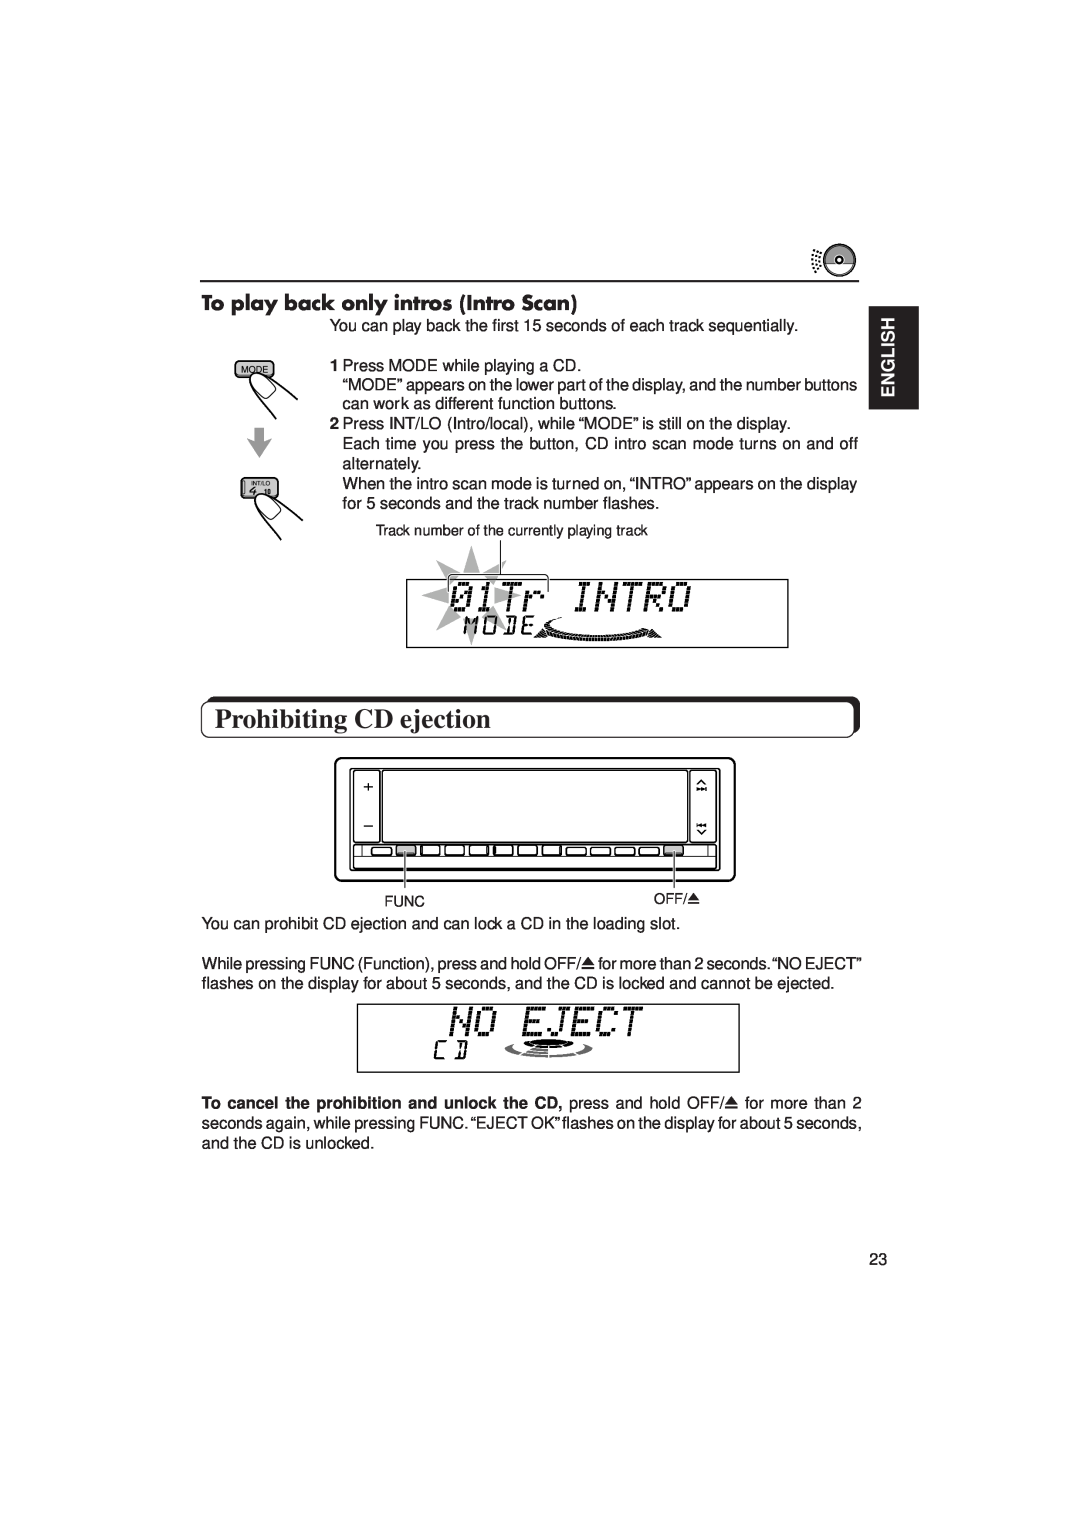 JVC KD-LX3R manual Prohibiting CD ejection, To play back only intros Intro Scan, English 